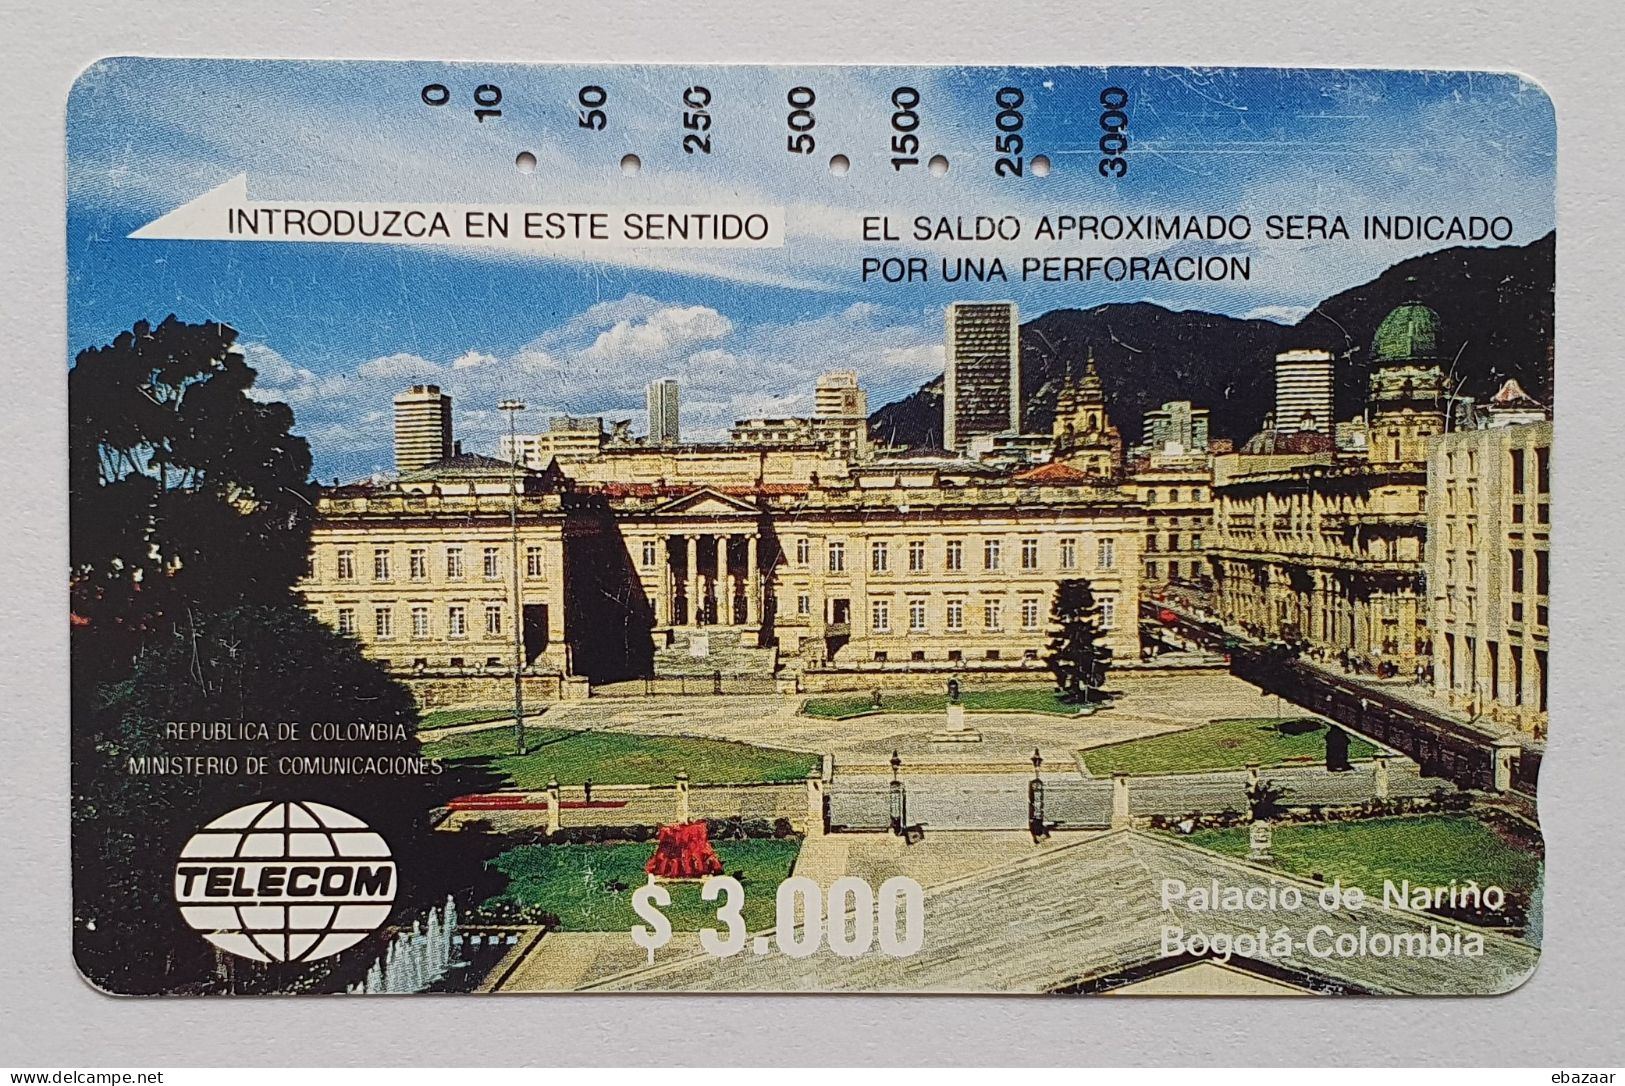 Colombia Narino Palace, Bogota $3.000 Phonecard Used - Colombia